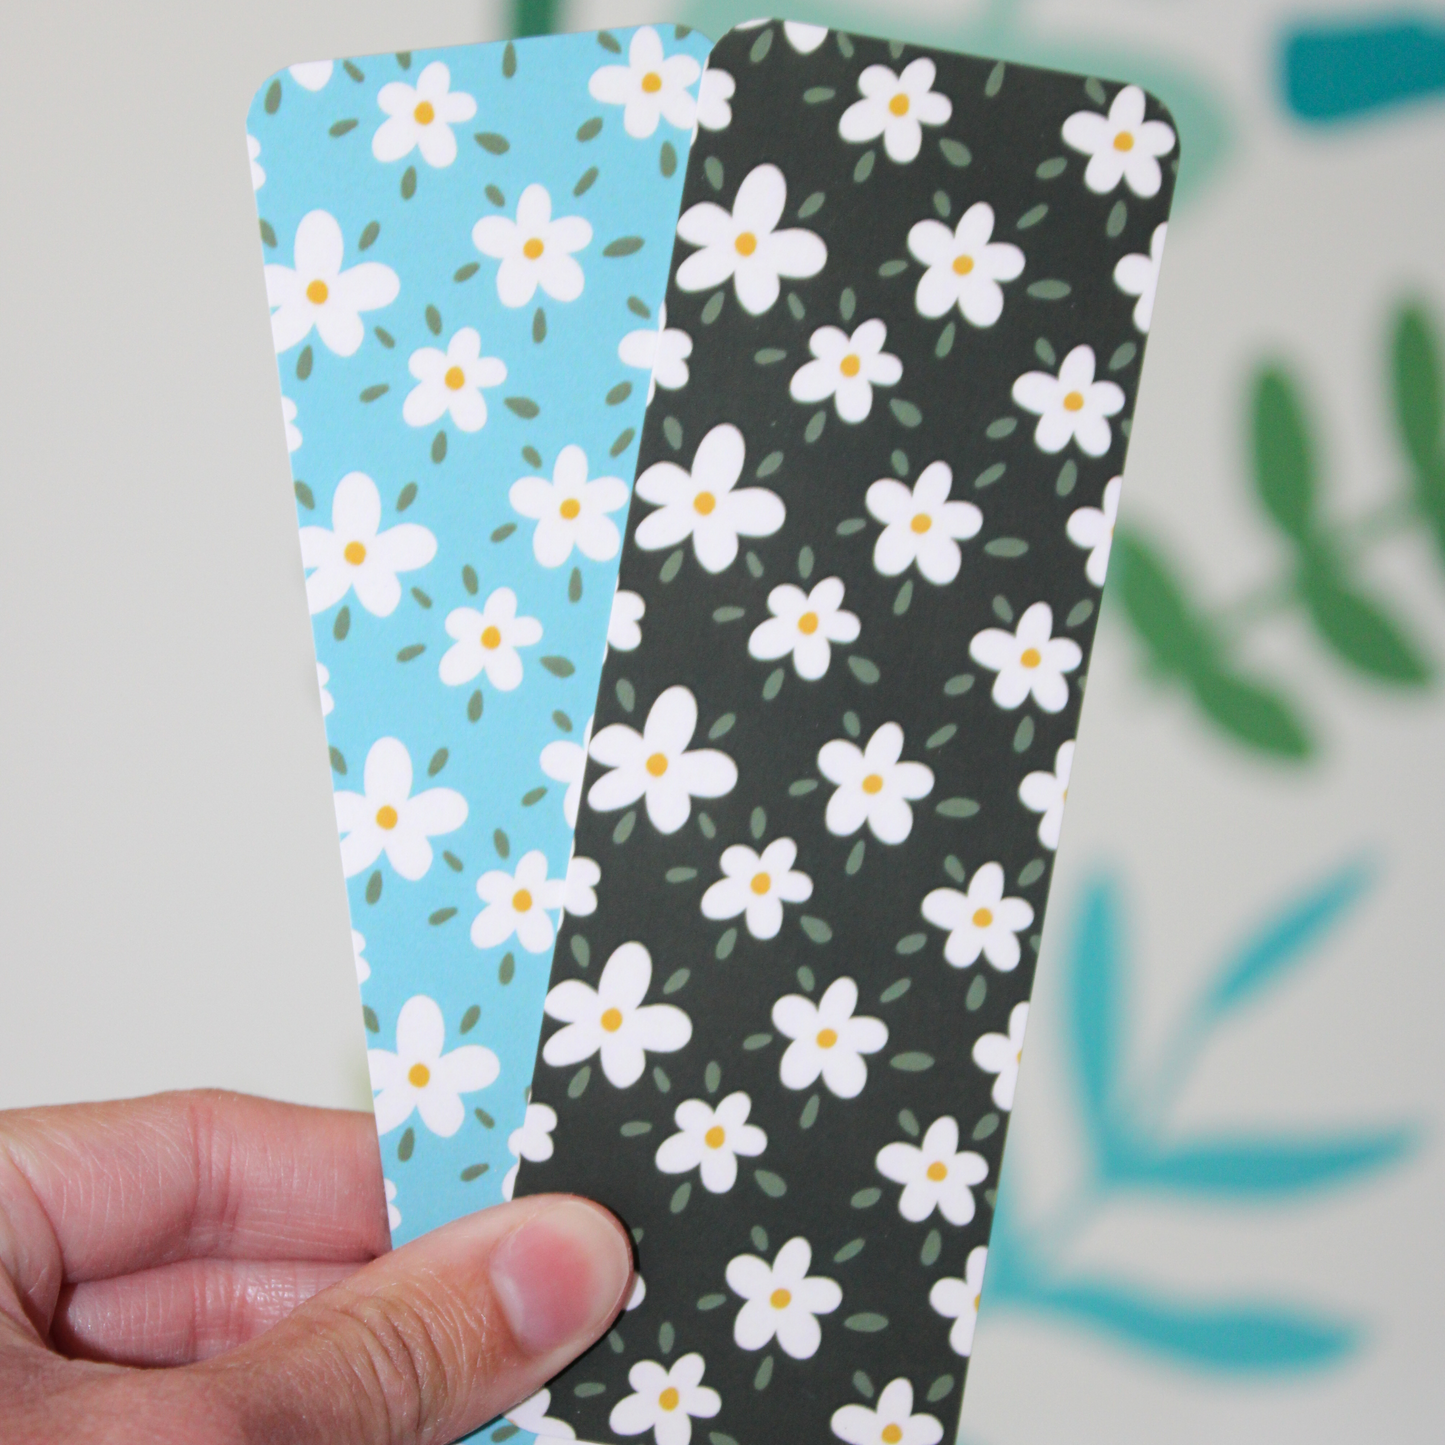 Hand holding two bookmarks, the blue daisy and the black daisy. Blurred leaf pattern in background.